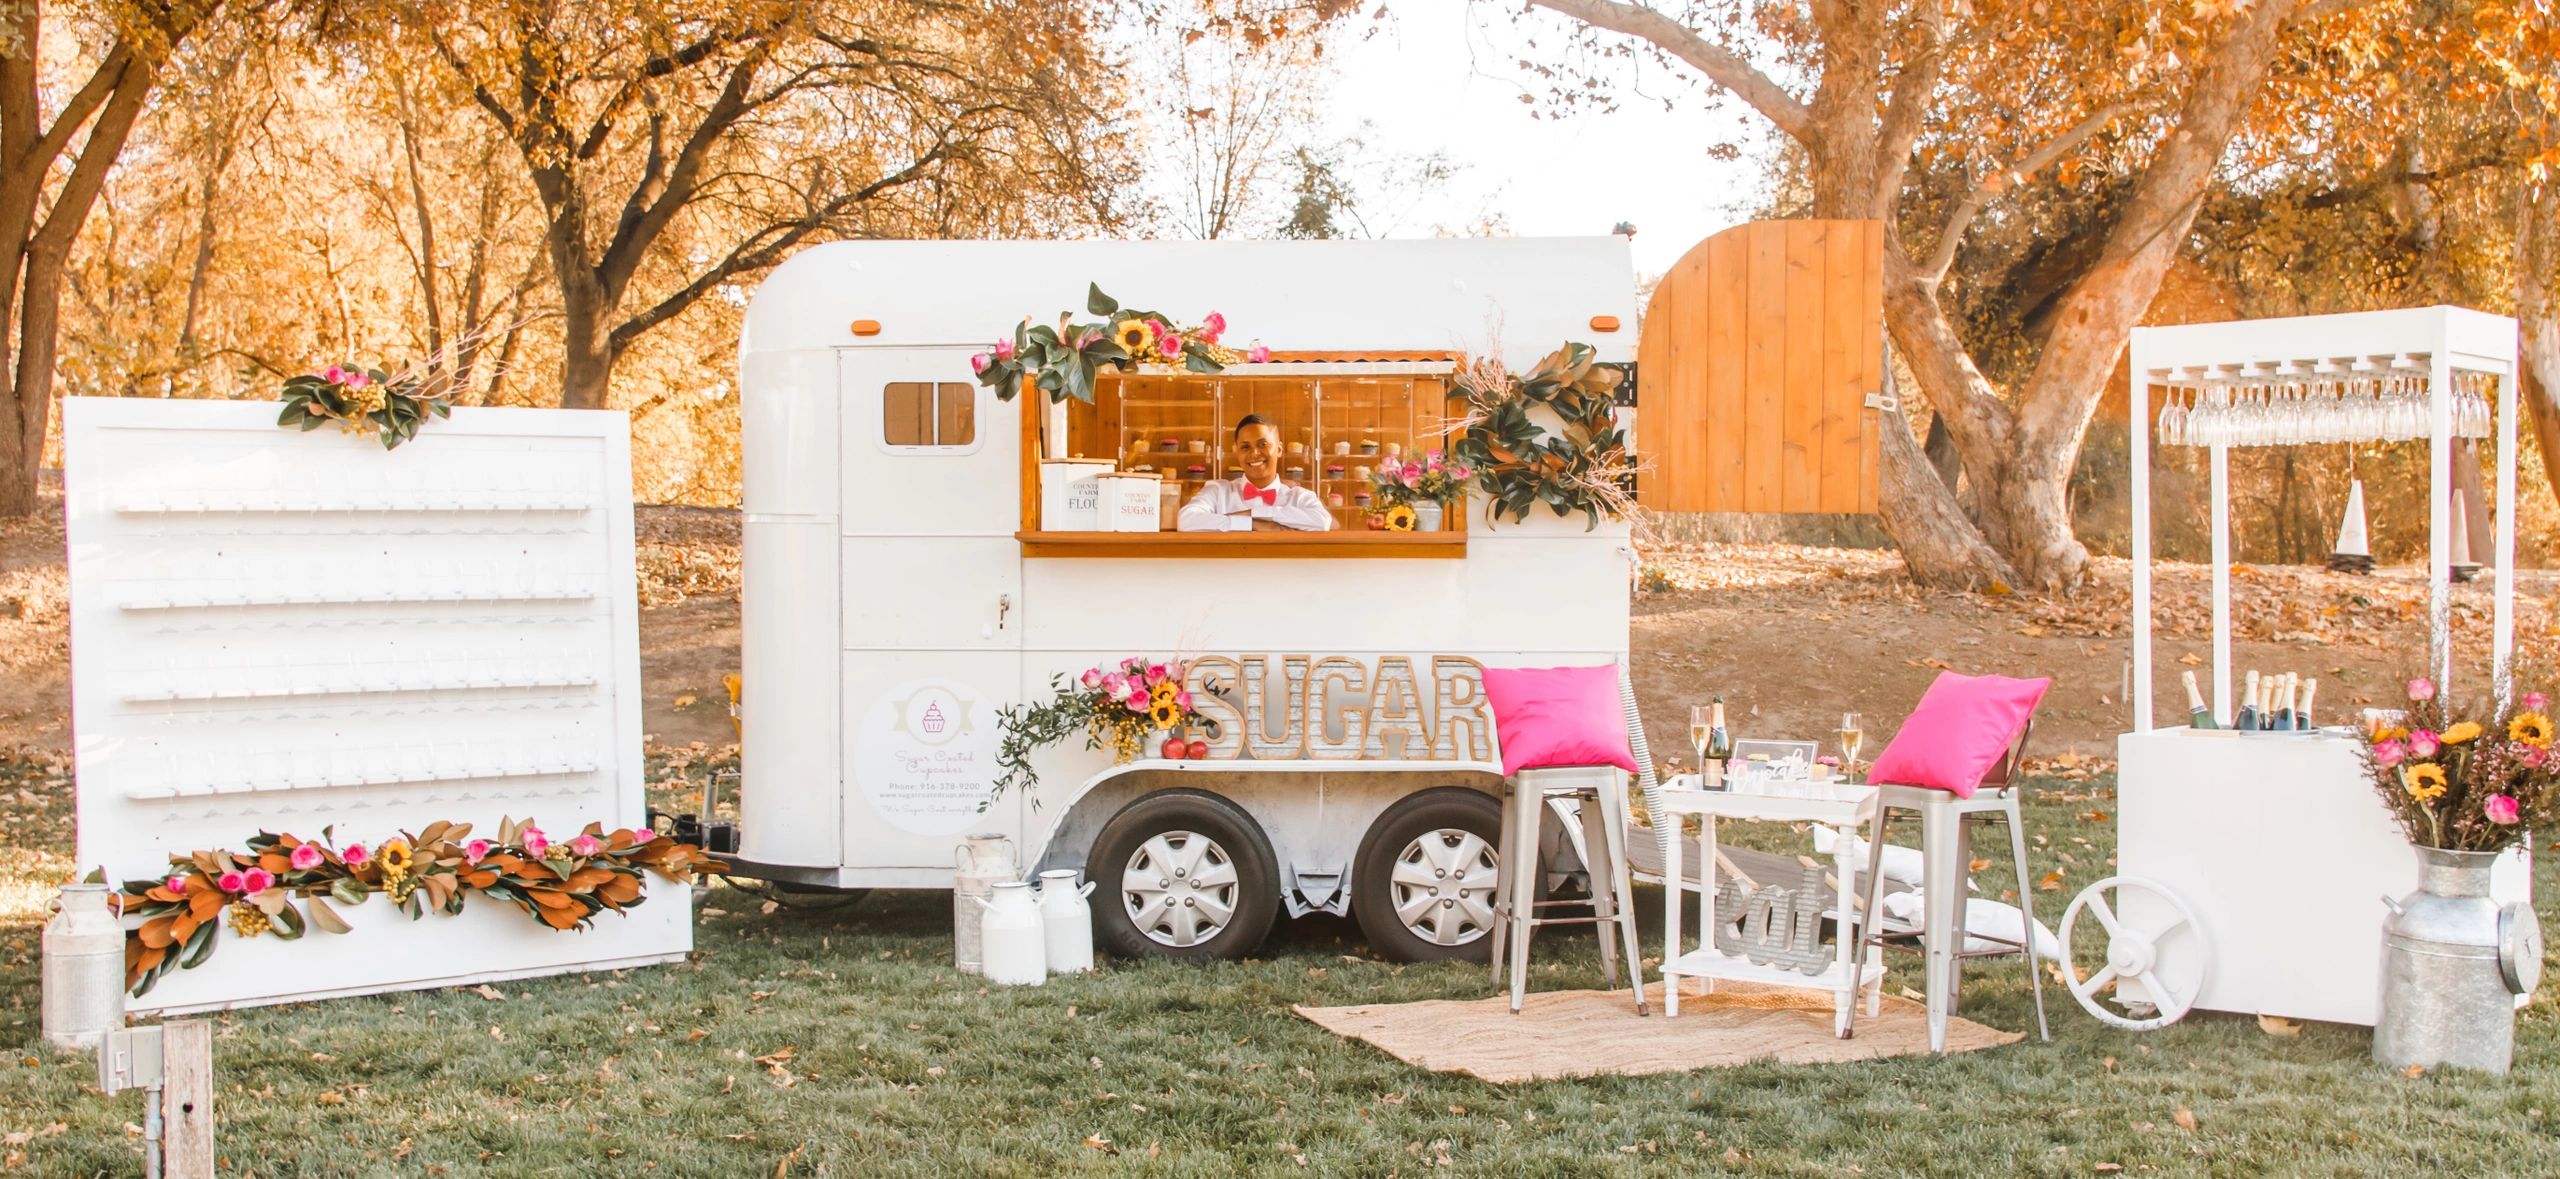 Champagne Wall, Mobile Trailer & Champagne Cart